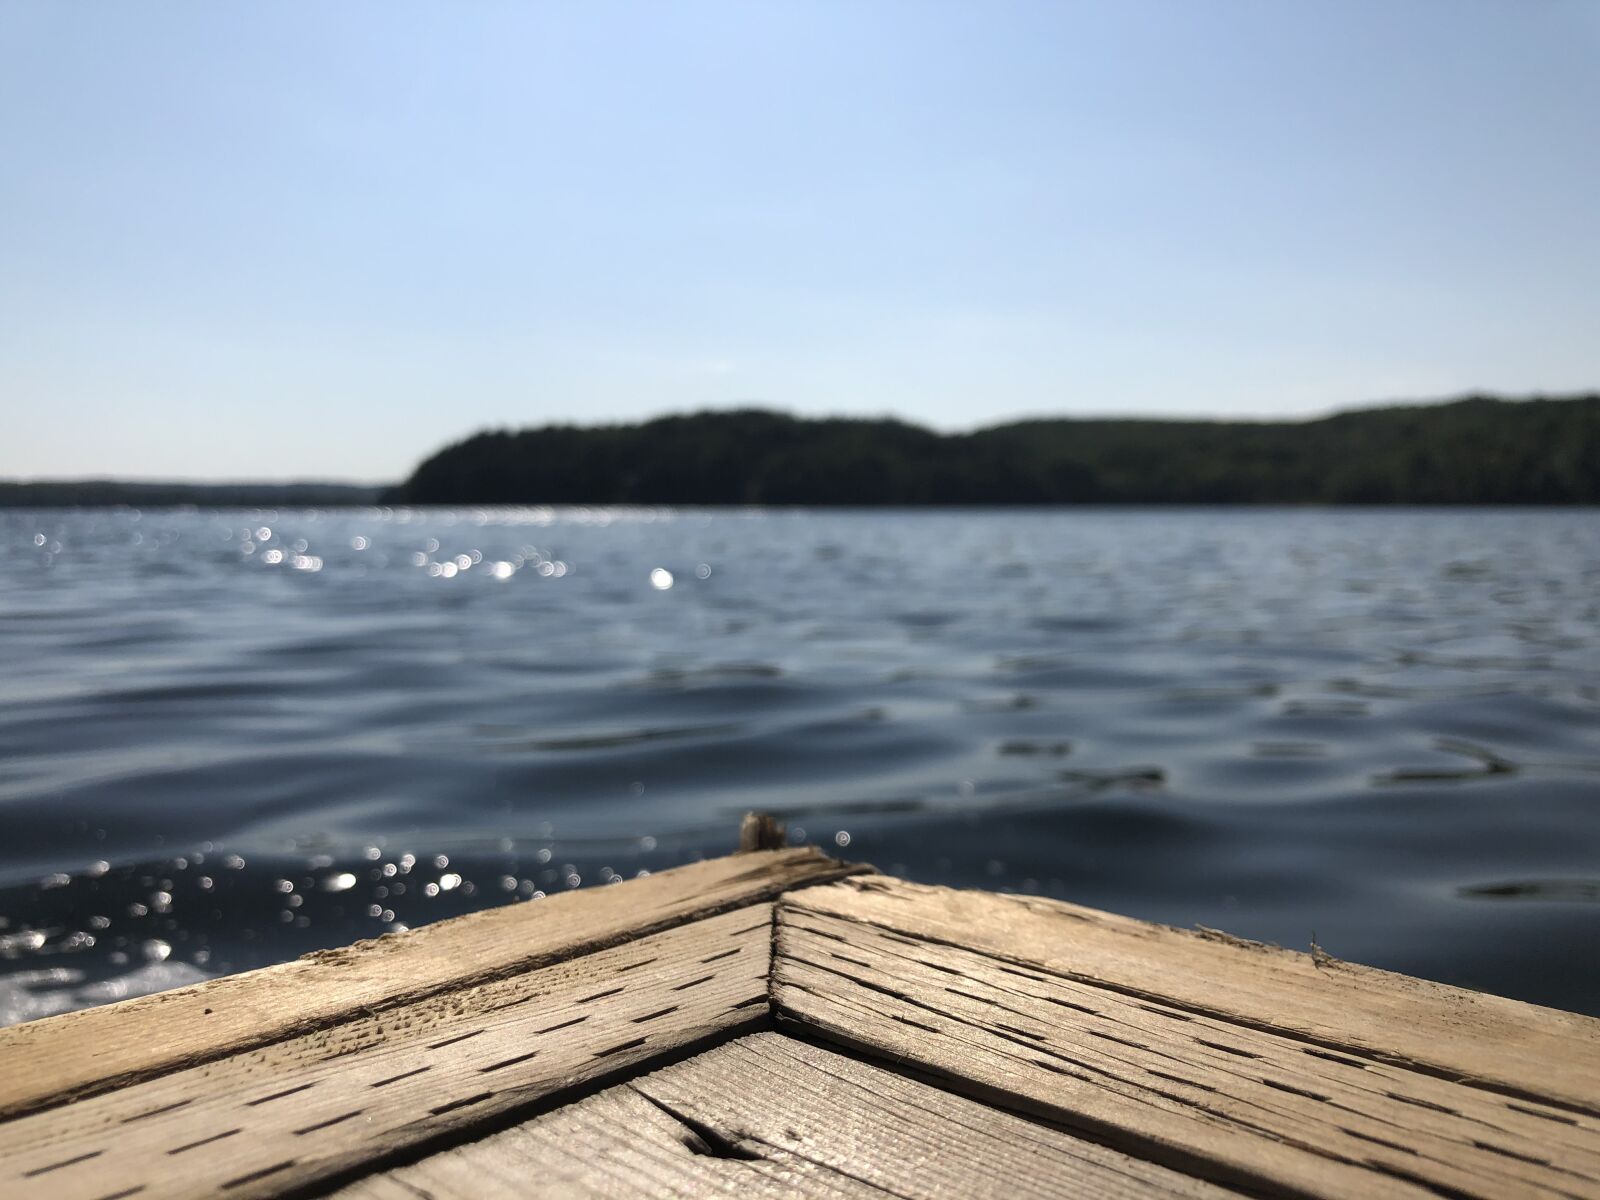 iPhone X back dual camera 4mm f/1.8 sample photo. Dock, water, foreground photography